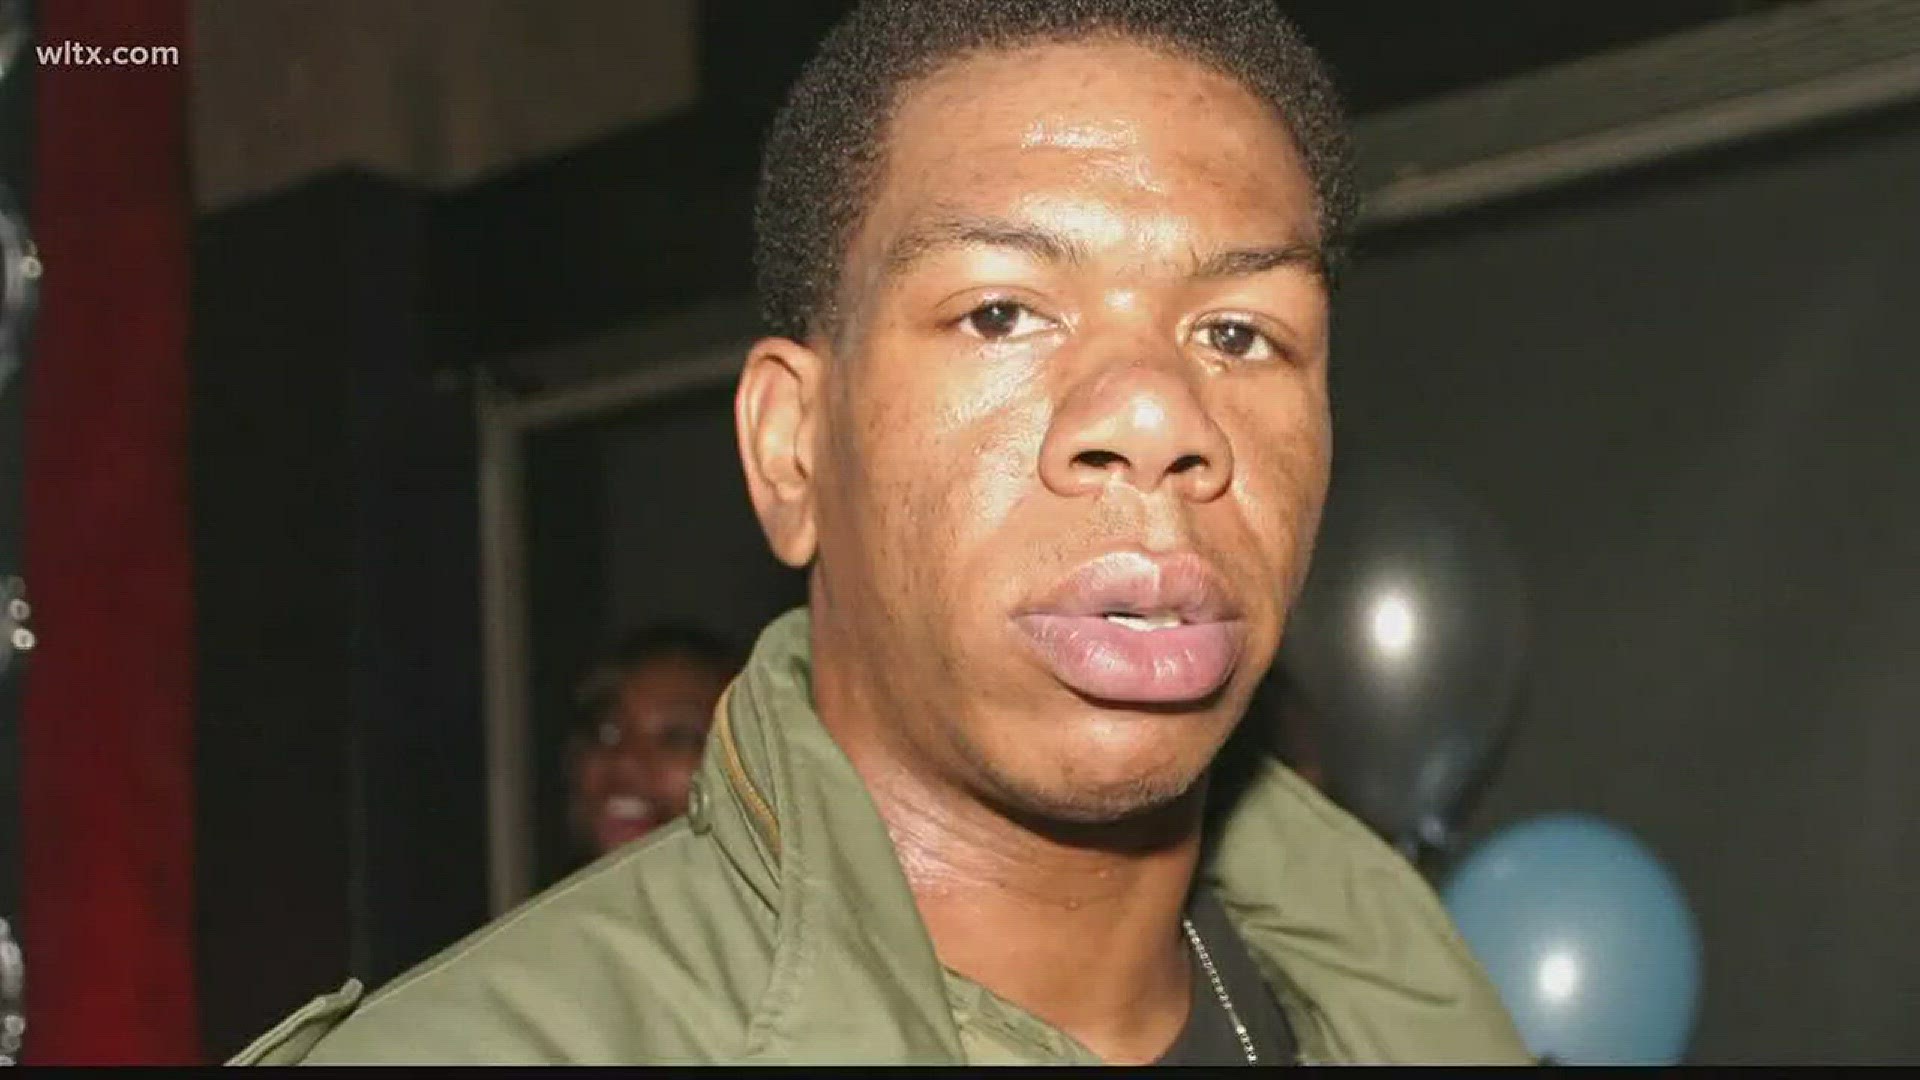 Former rapper Craig Mack, best known for the platinum 1994 hit Flava in Ya Ear, has died at his home in South Carolina.